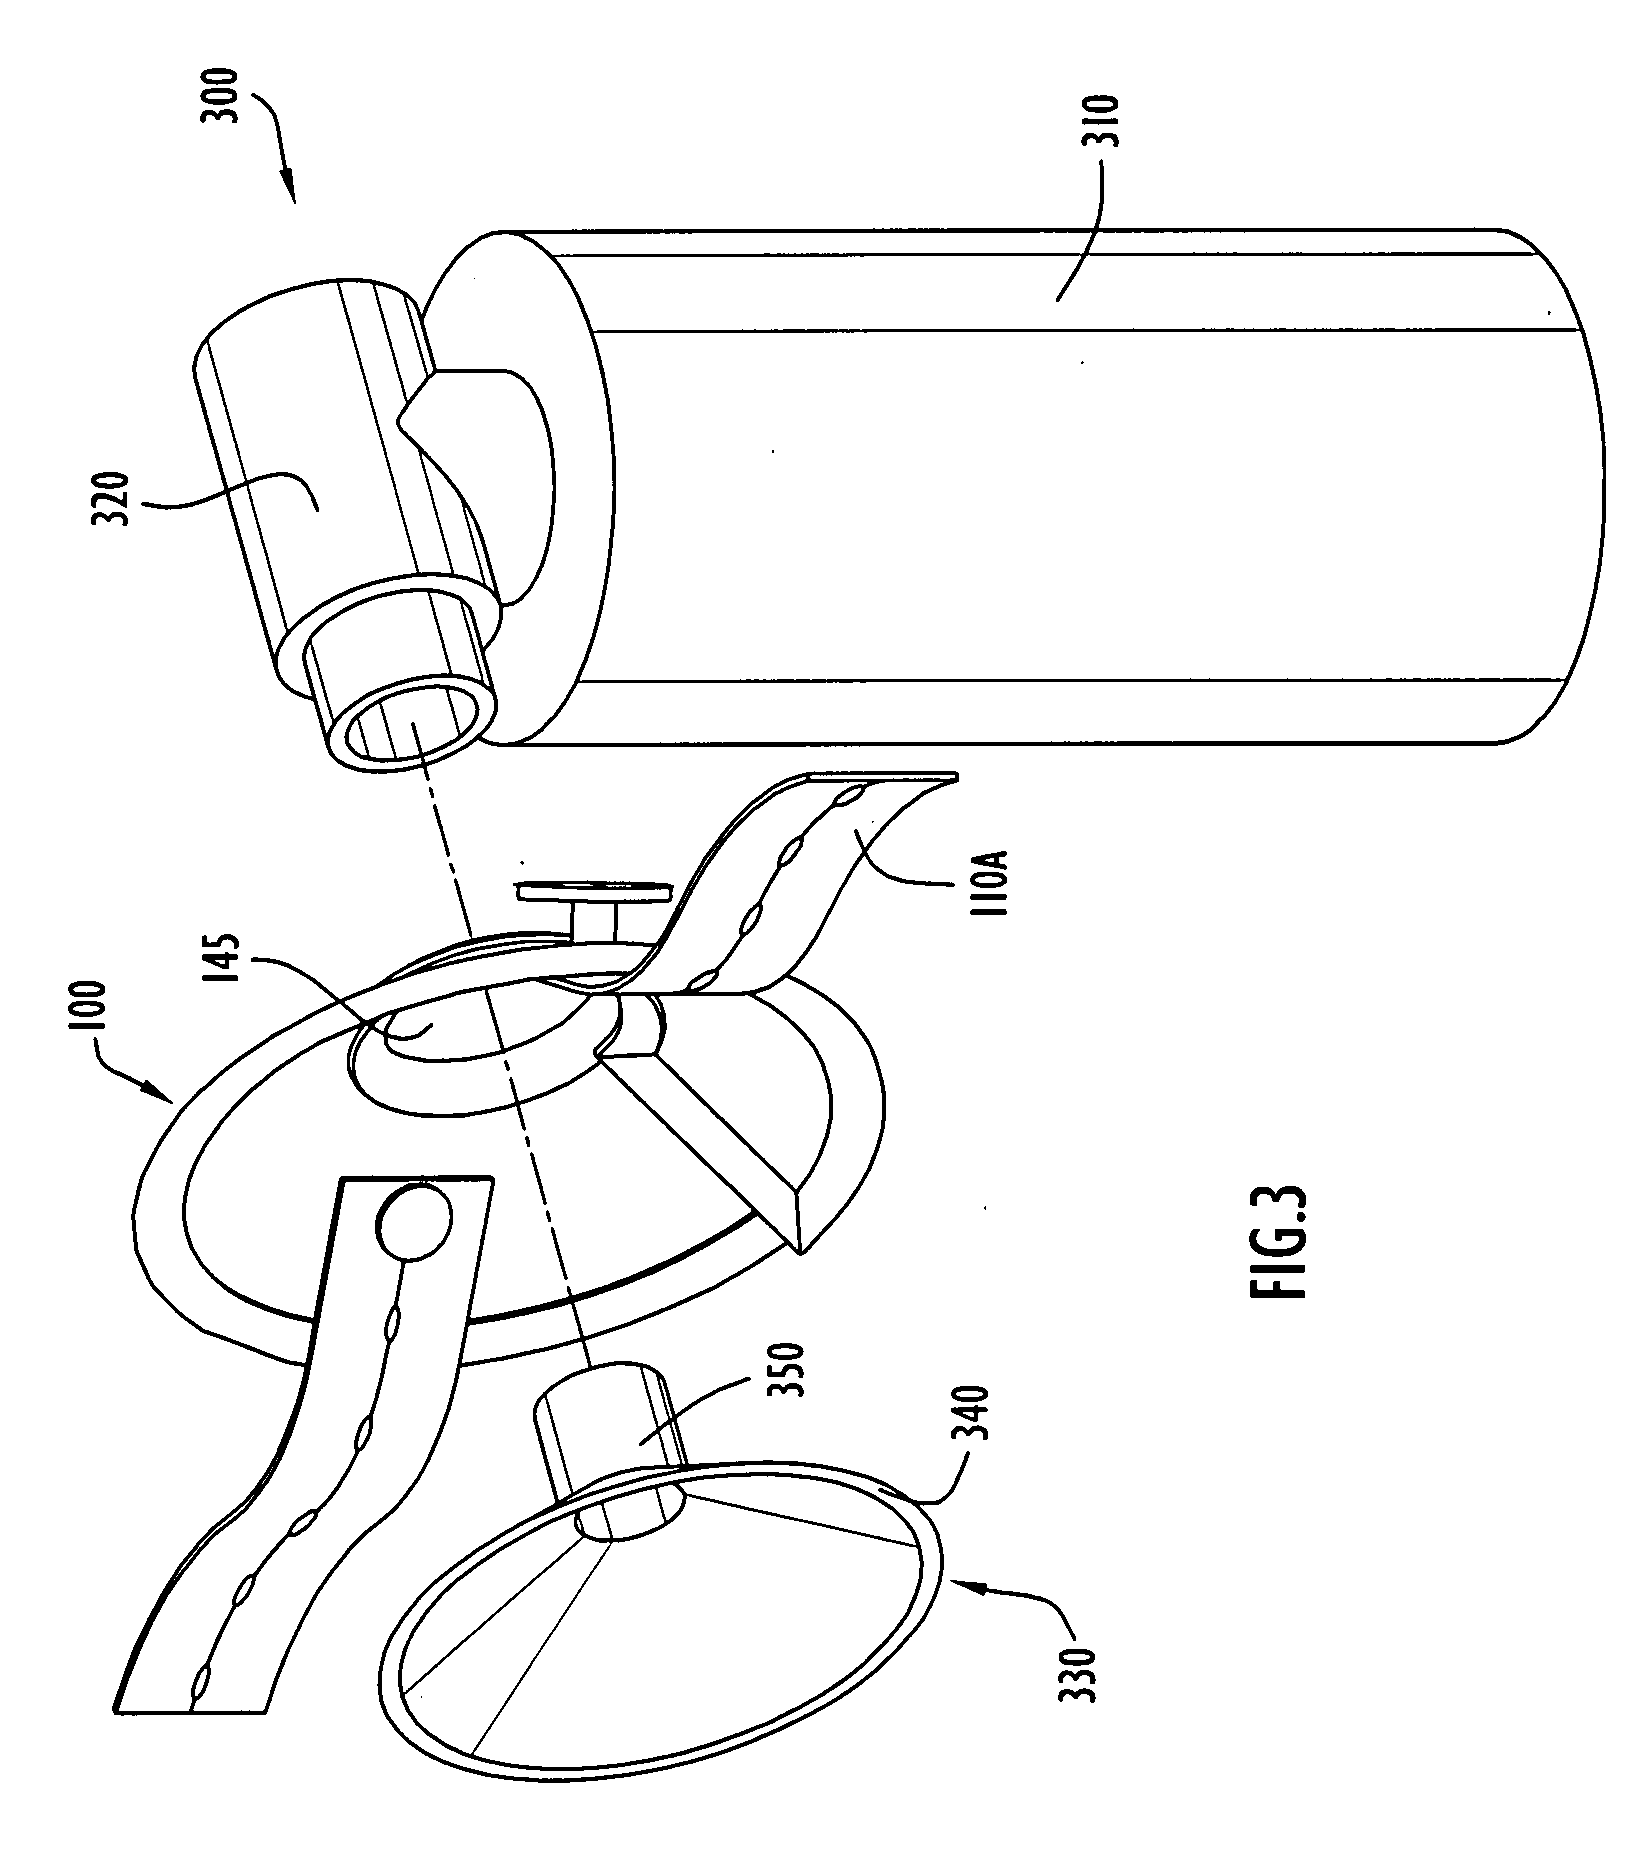 Support device for a breast pump